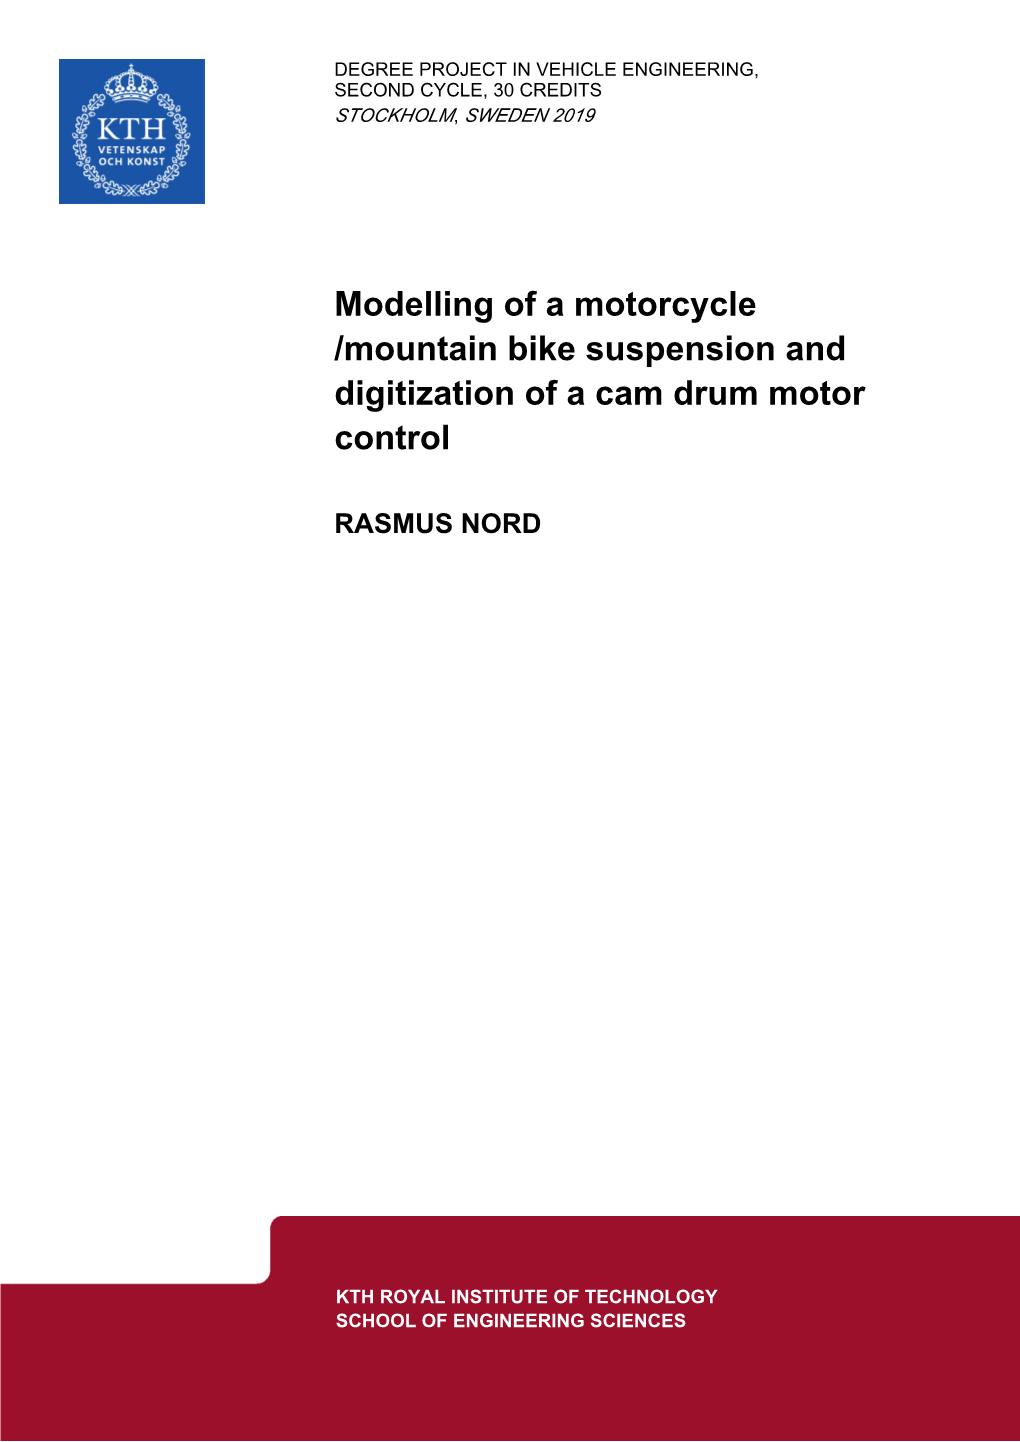 Modelling of a Motorcycle /Mountain Bike Suspension and Digitization of a Cam Drum Motor Control